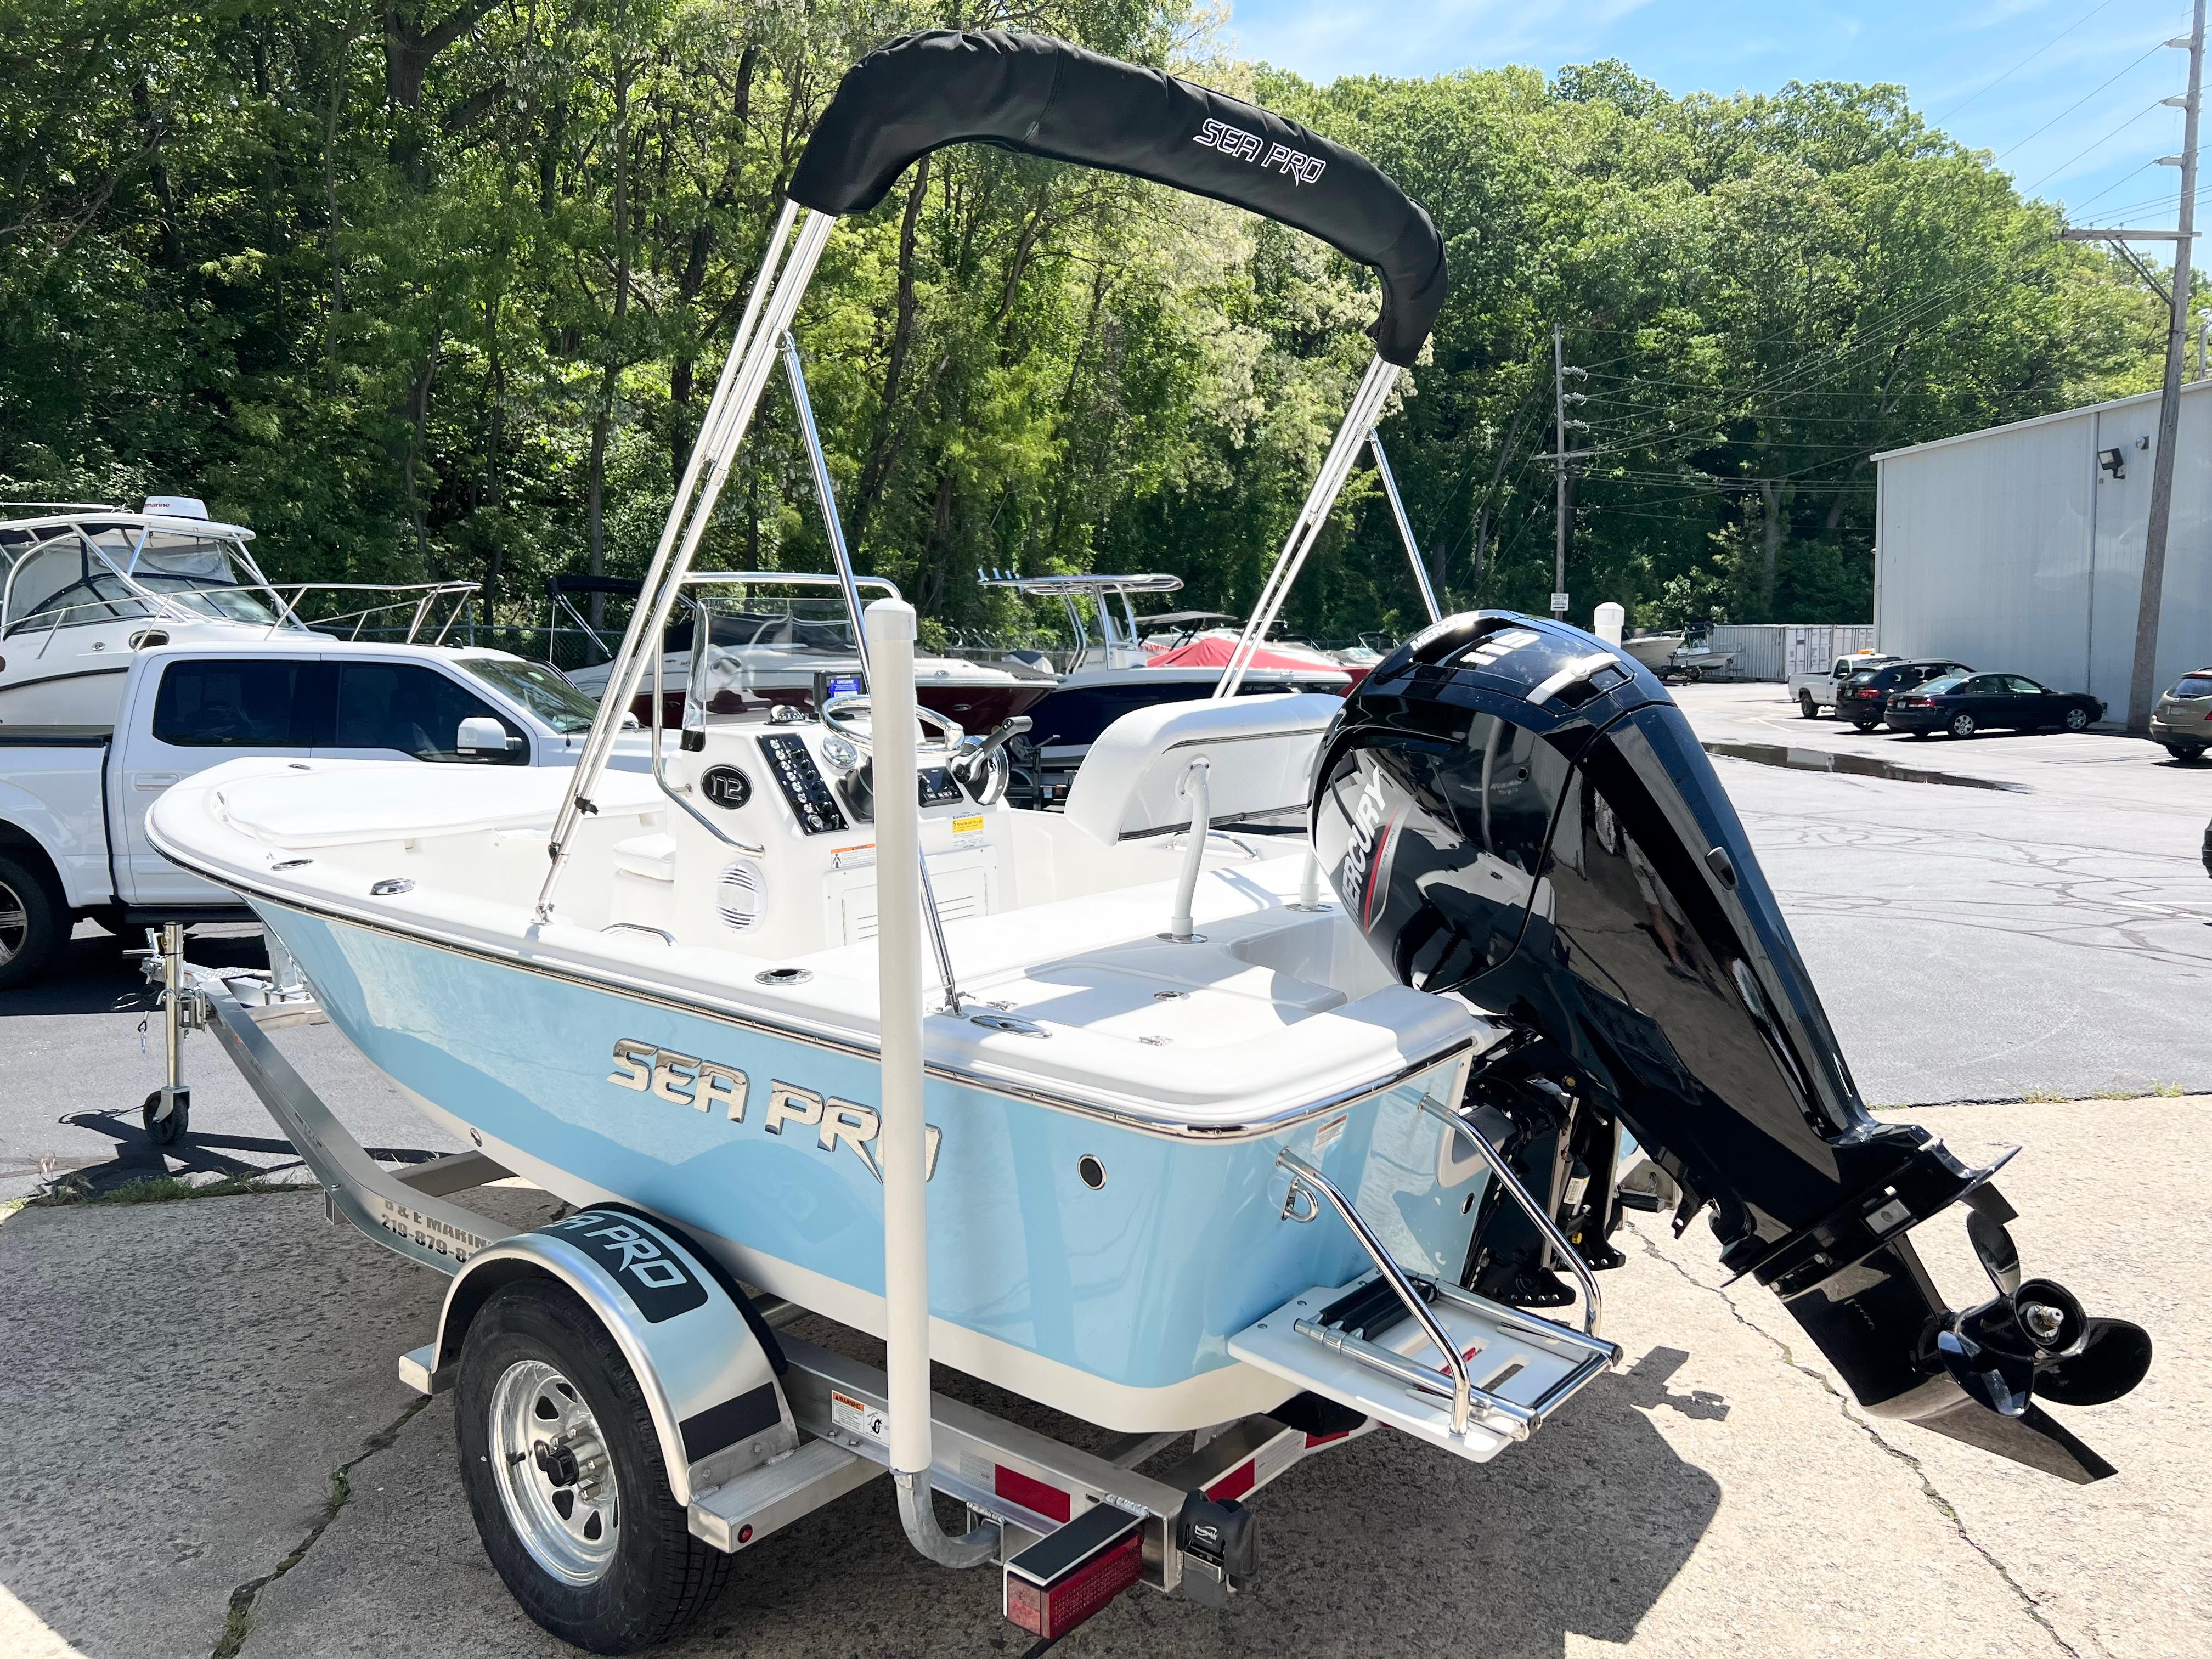 2022 Sea Pro 172 Bay 115 HP with TRAILER